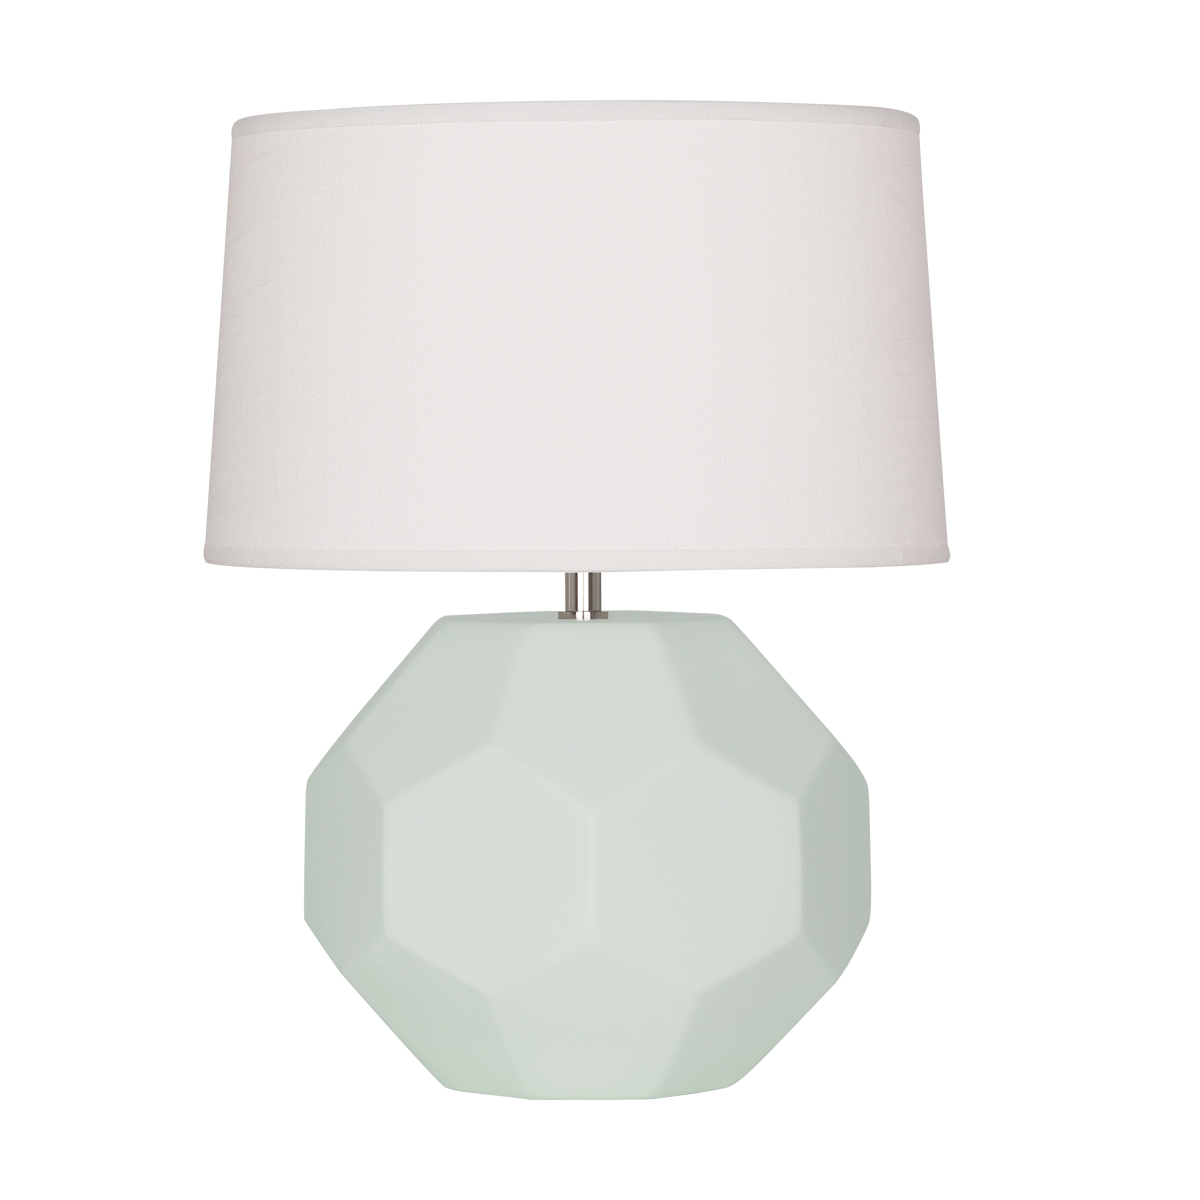 Franklin Accent Lamp